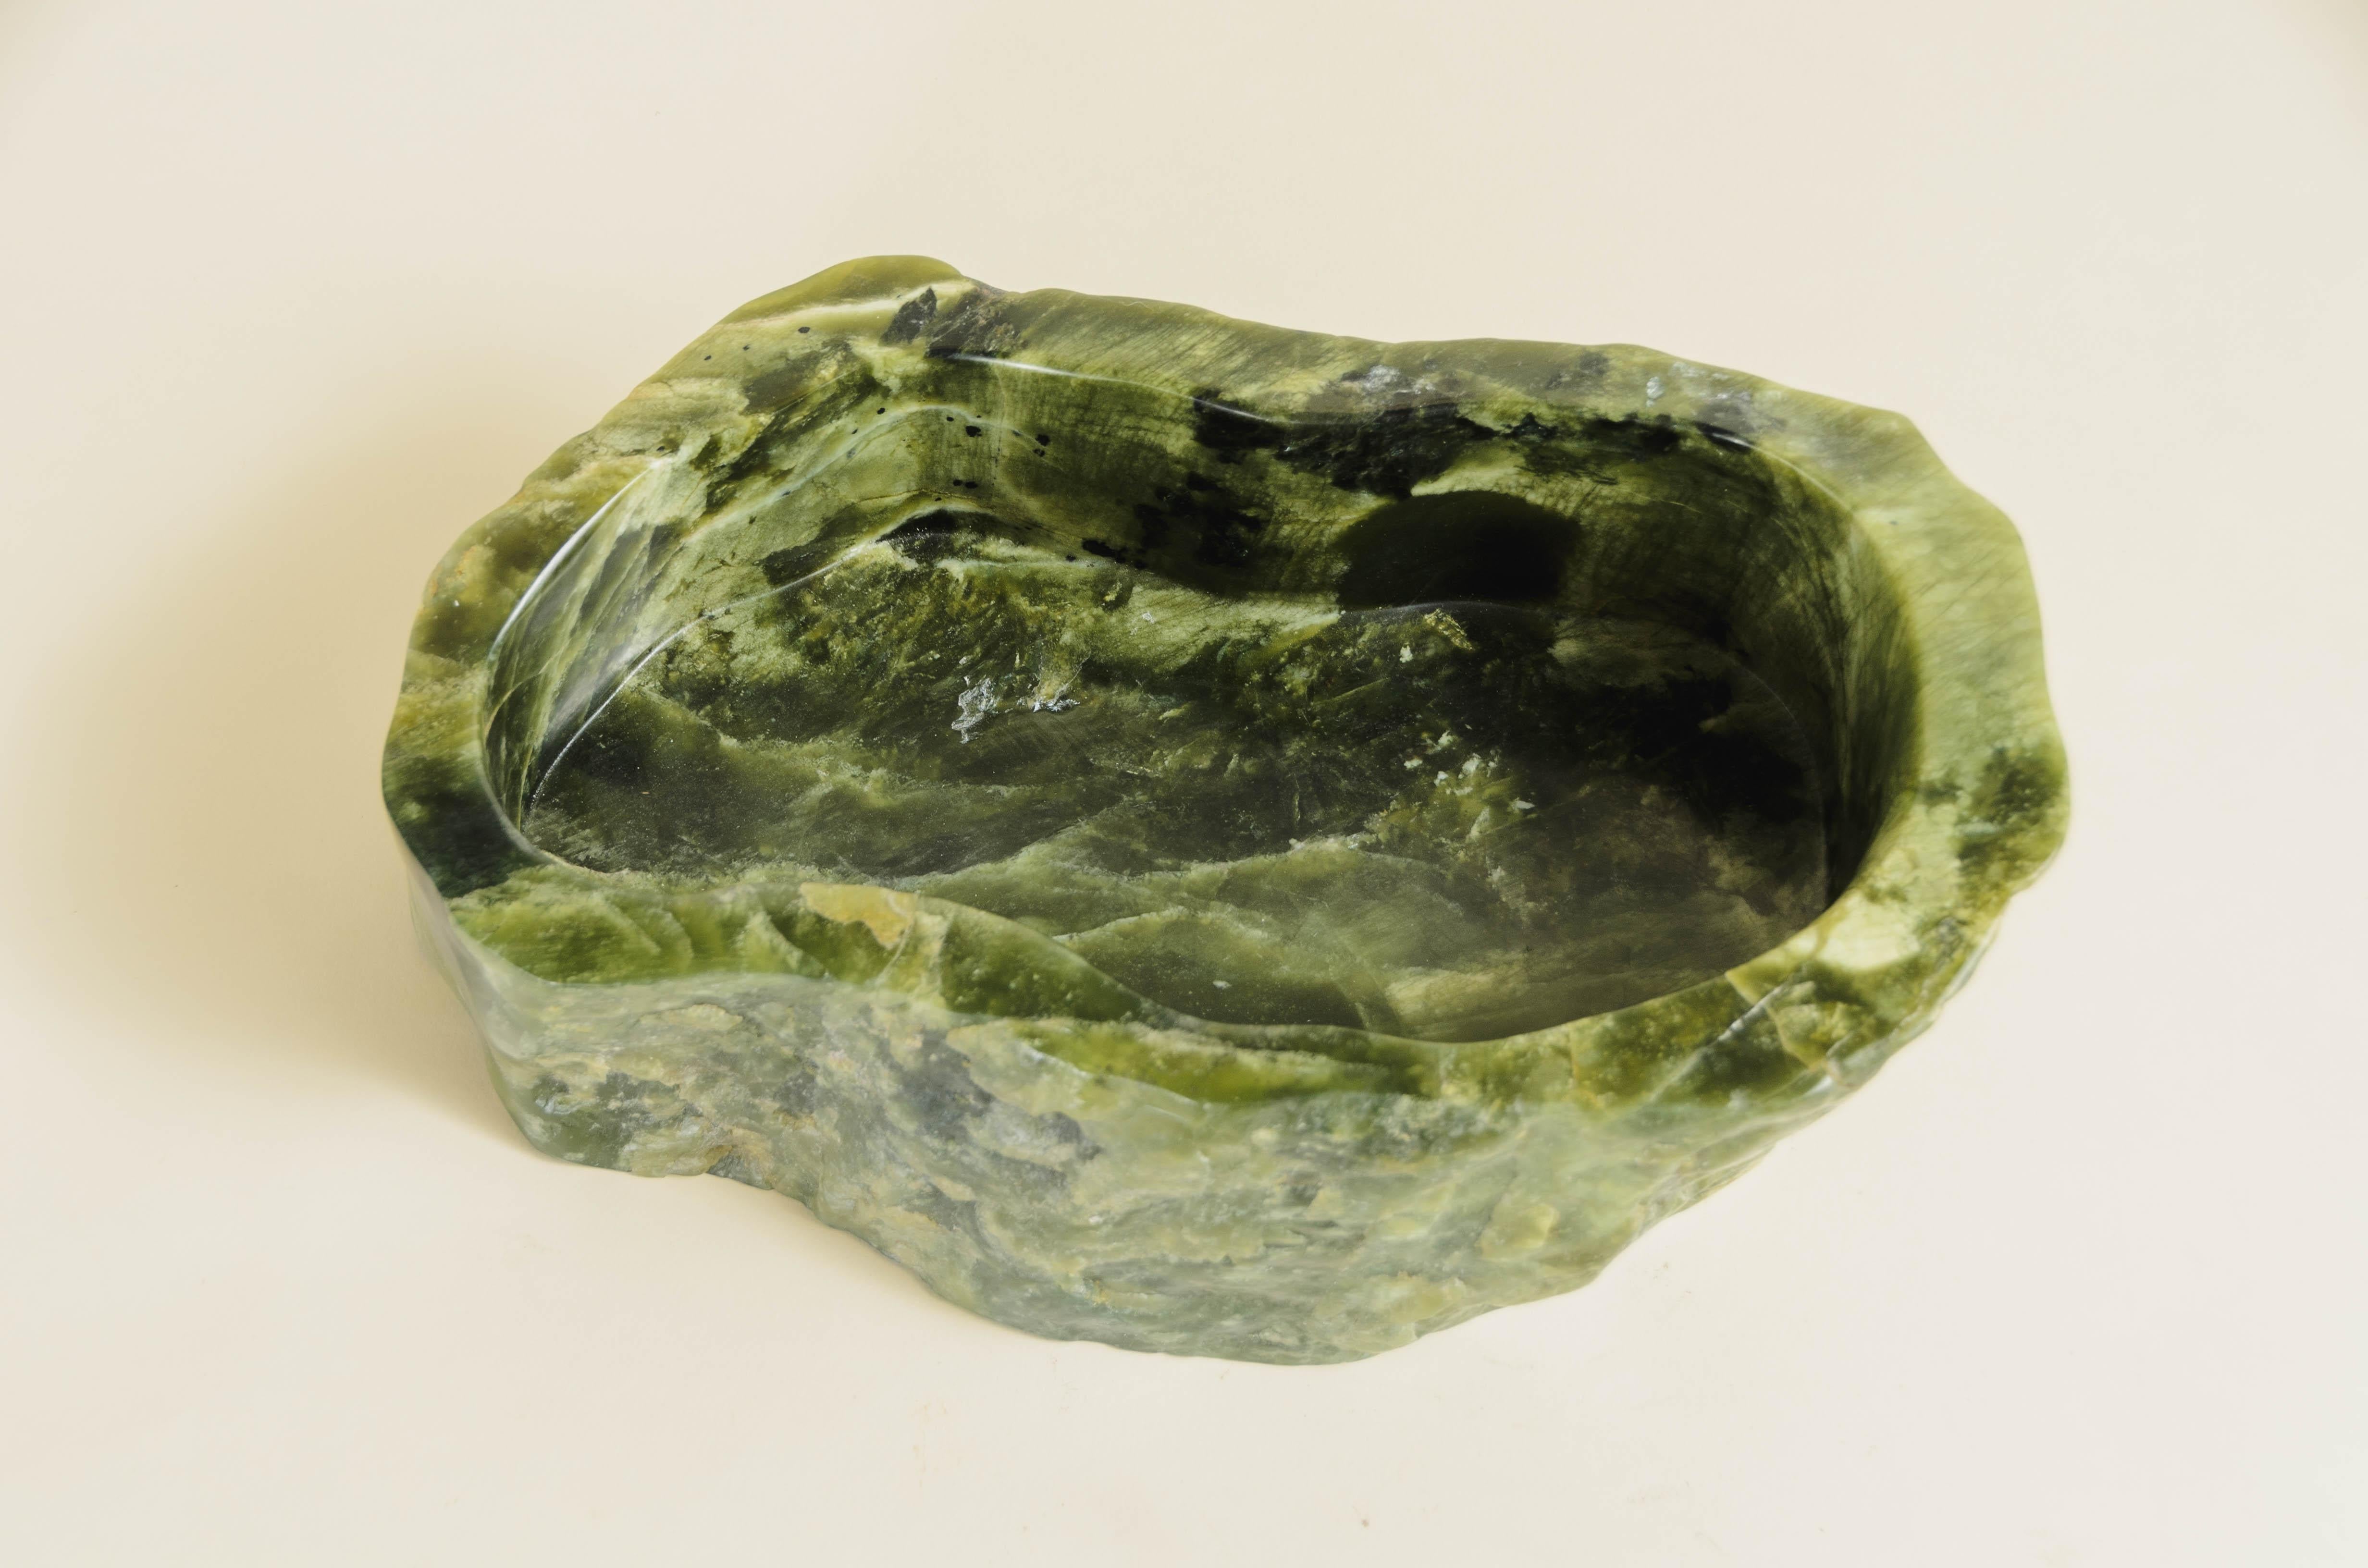 Contemporary Nephrite Jade Oblong Cachepot by Robert Kuo, Limited Edition For Sale 1